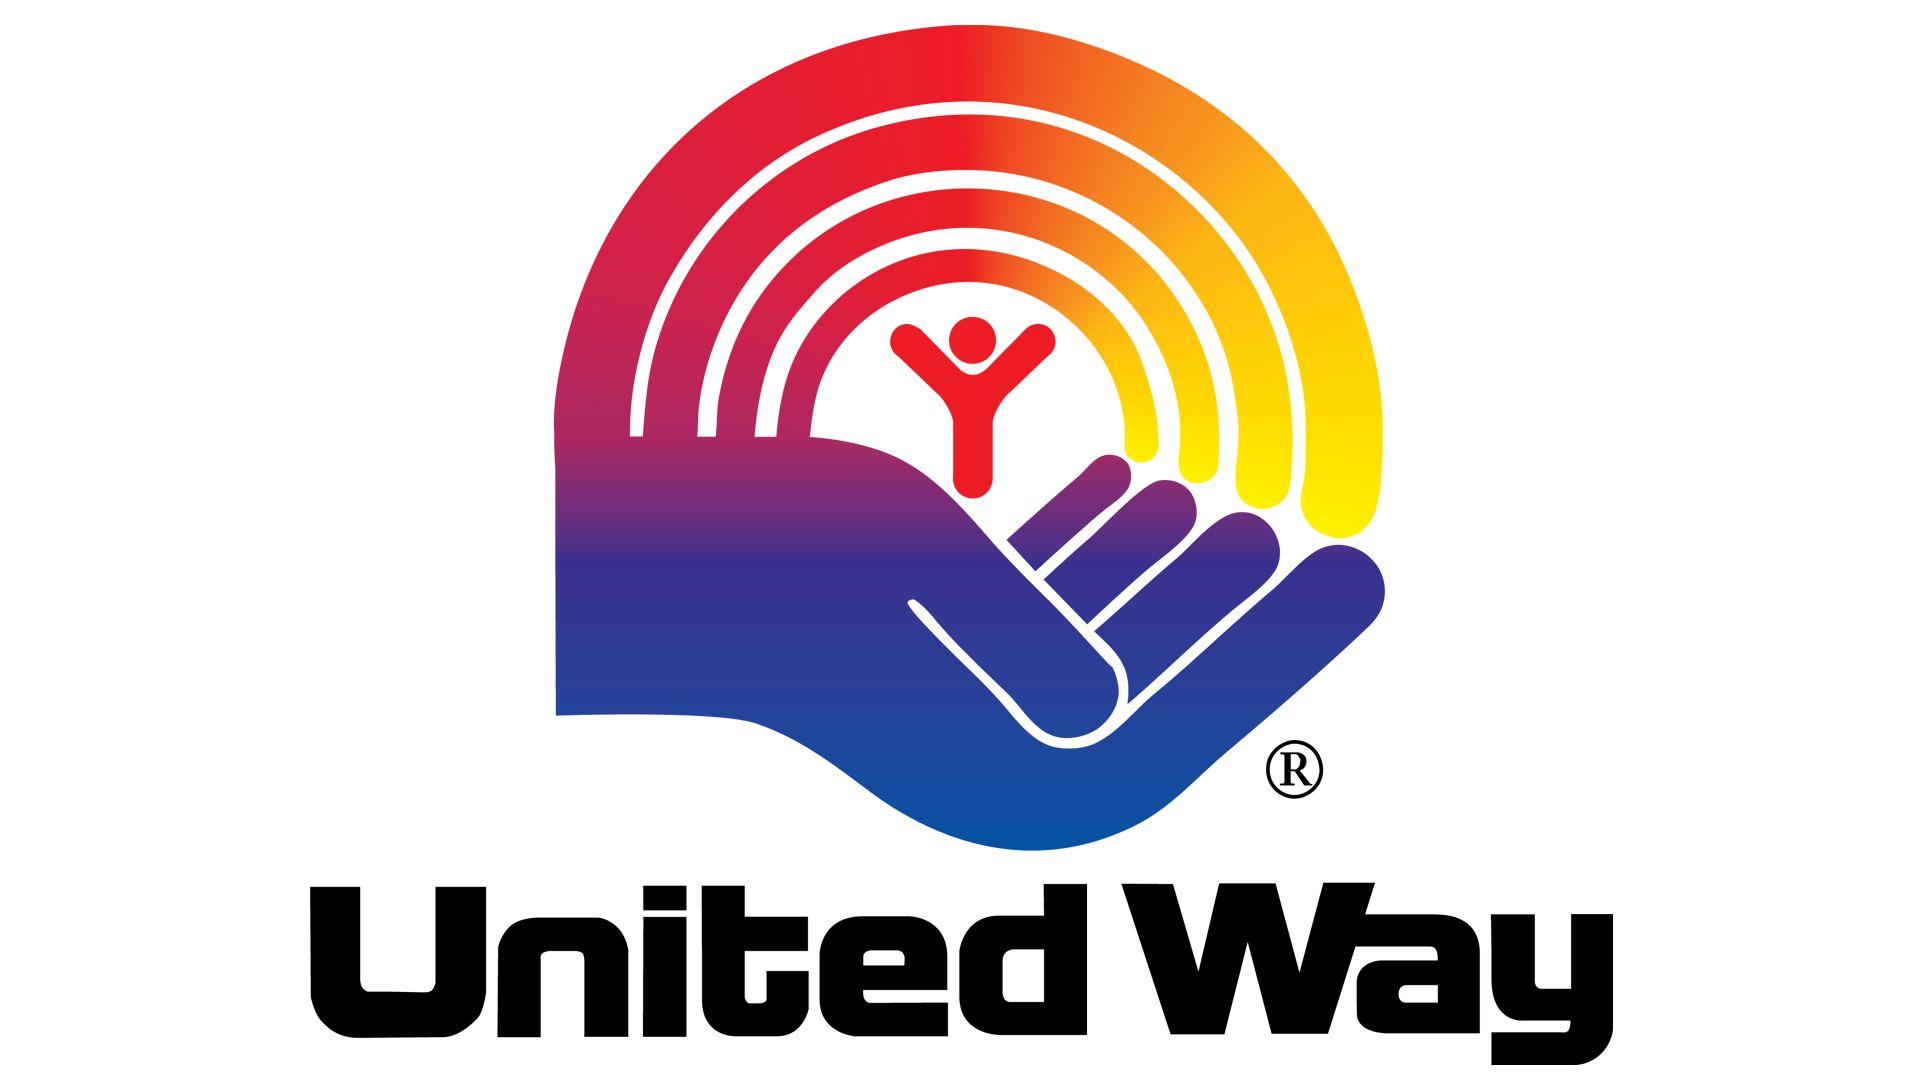 United Old Logo - United Way Logo, United Way Symbol, Meaning, History and Evolution